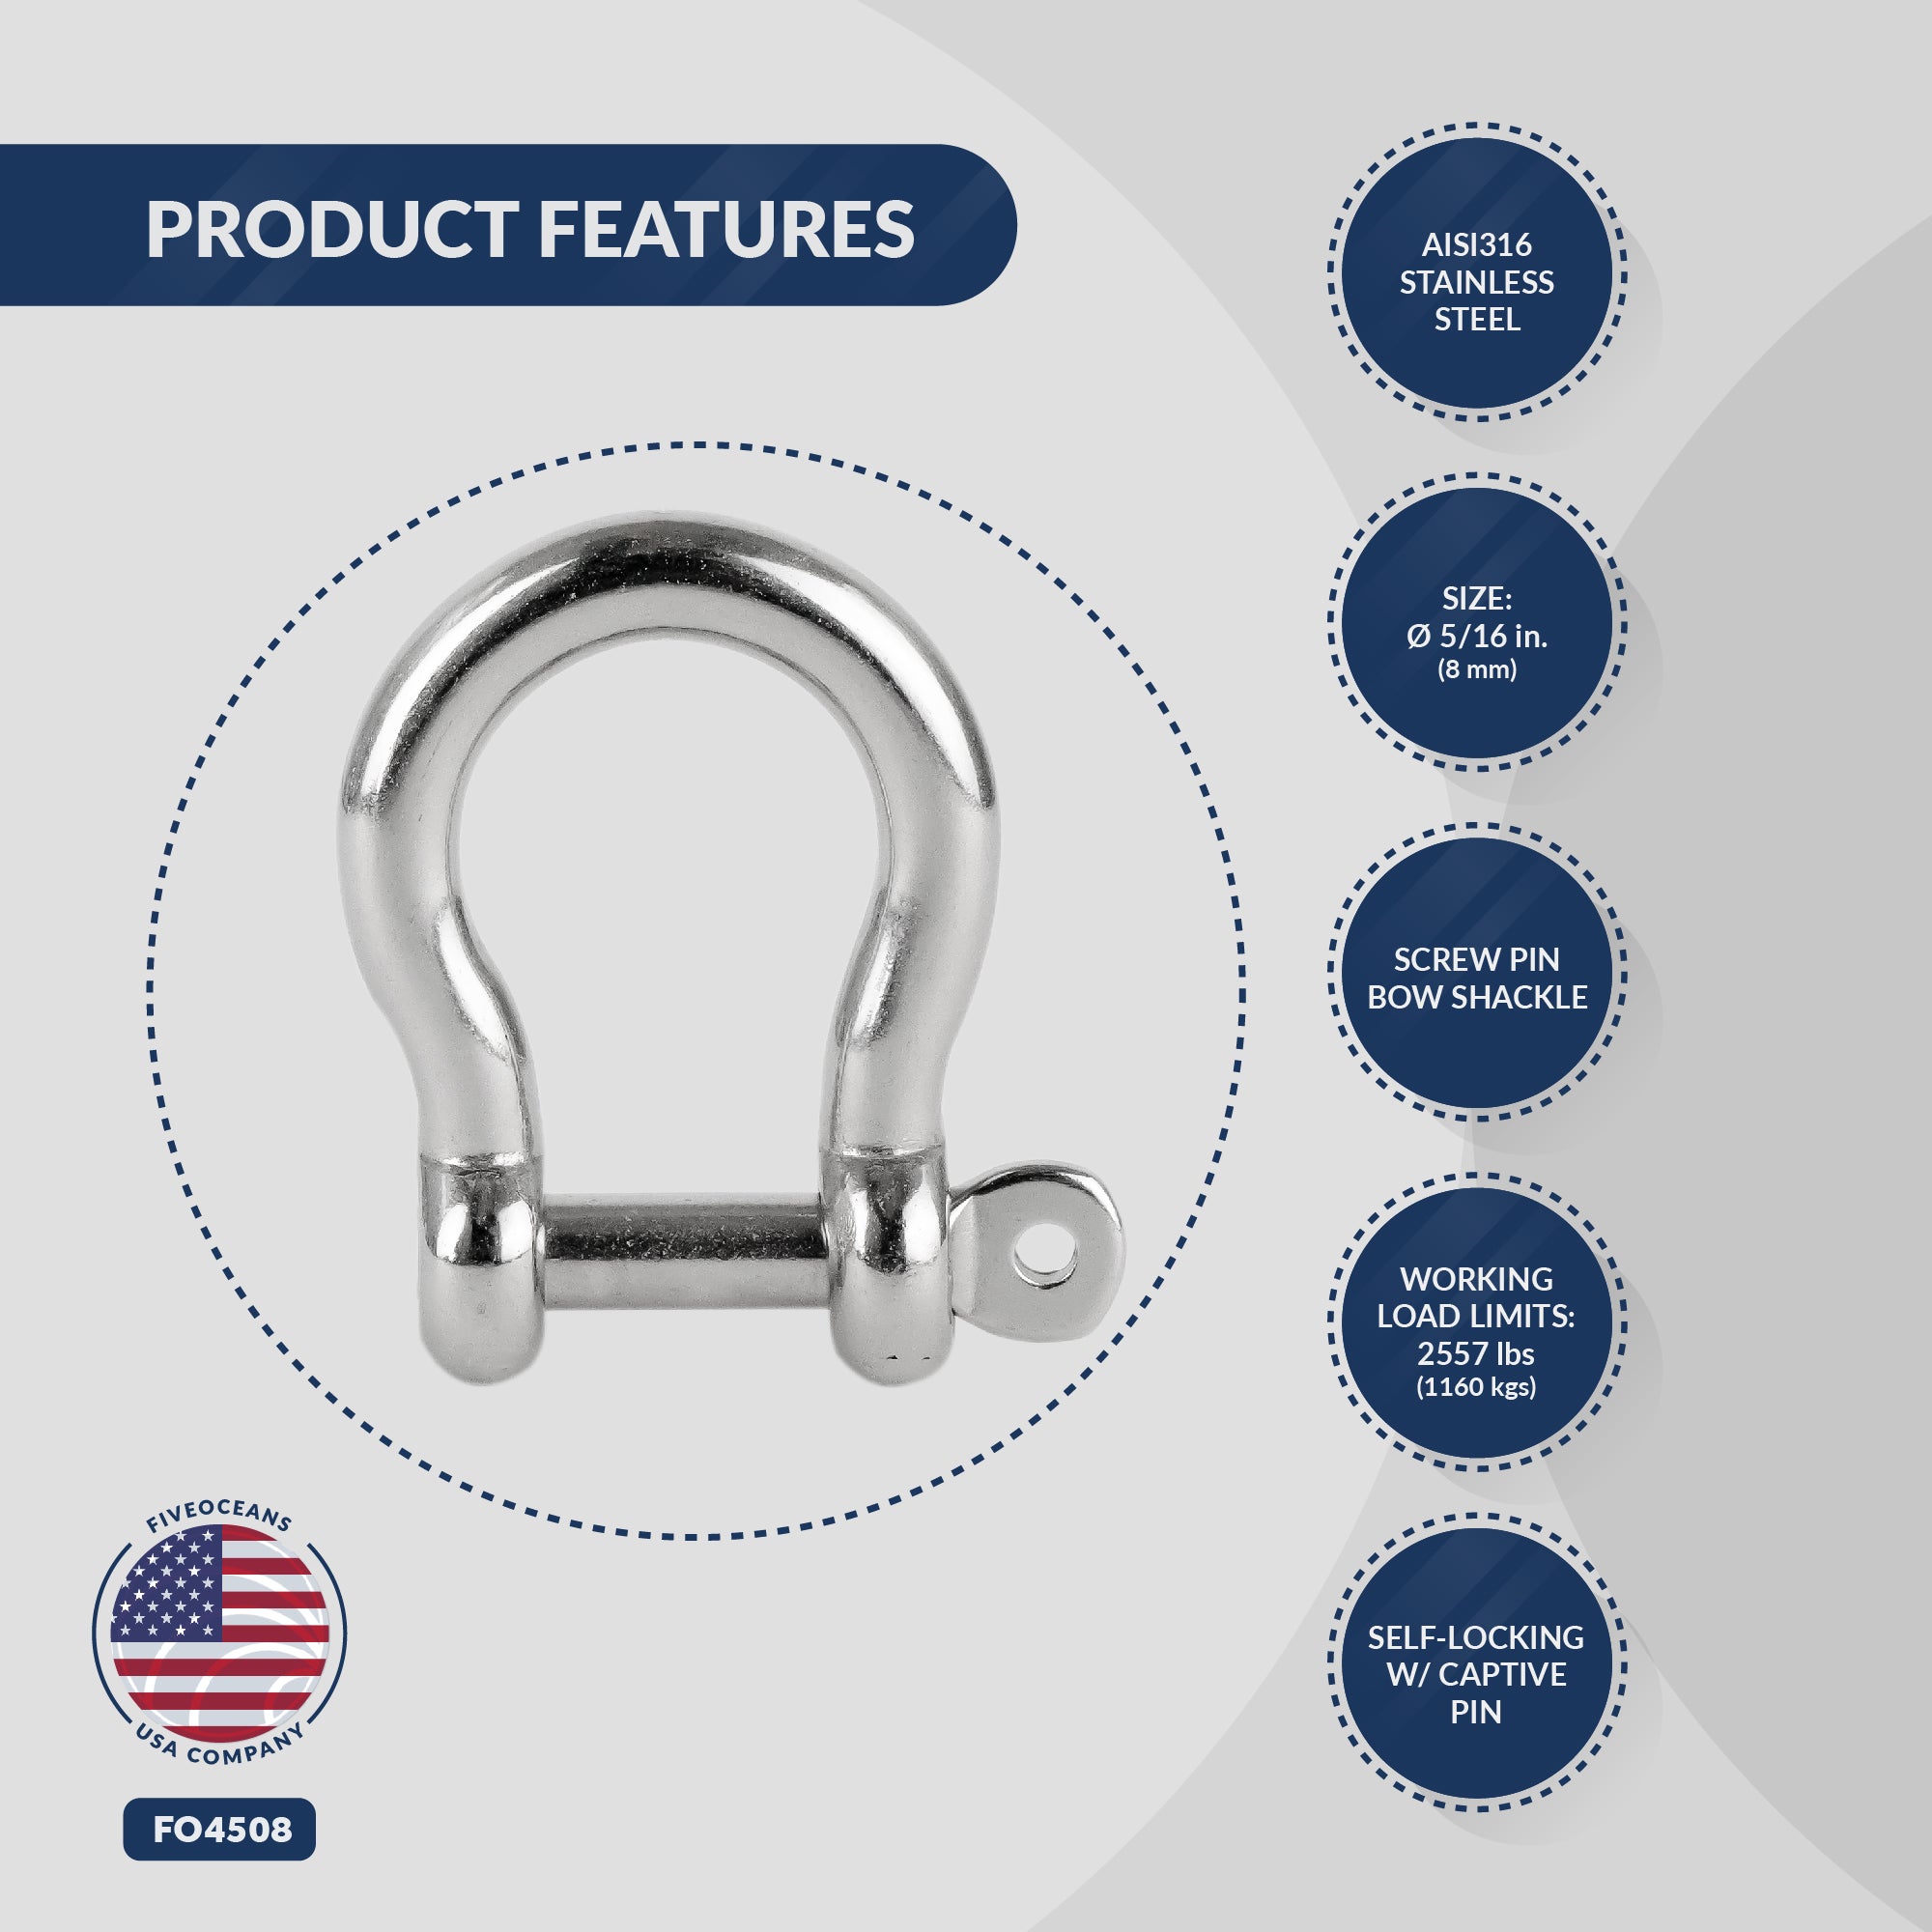 Screw Pin Bow Shackle 5/16", Stainless Steel, with captive Pin - FO4508